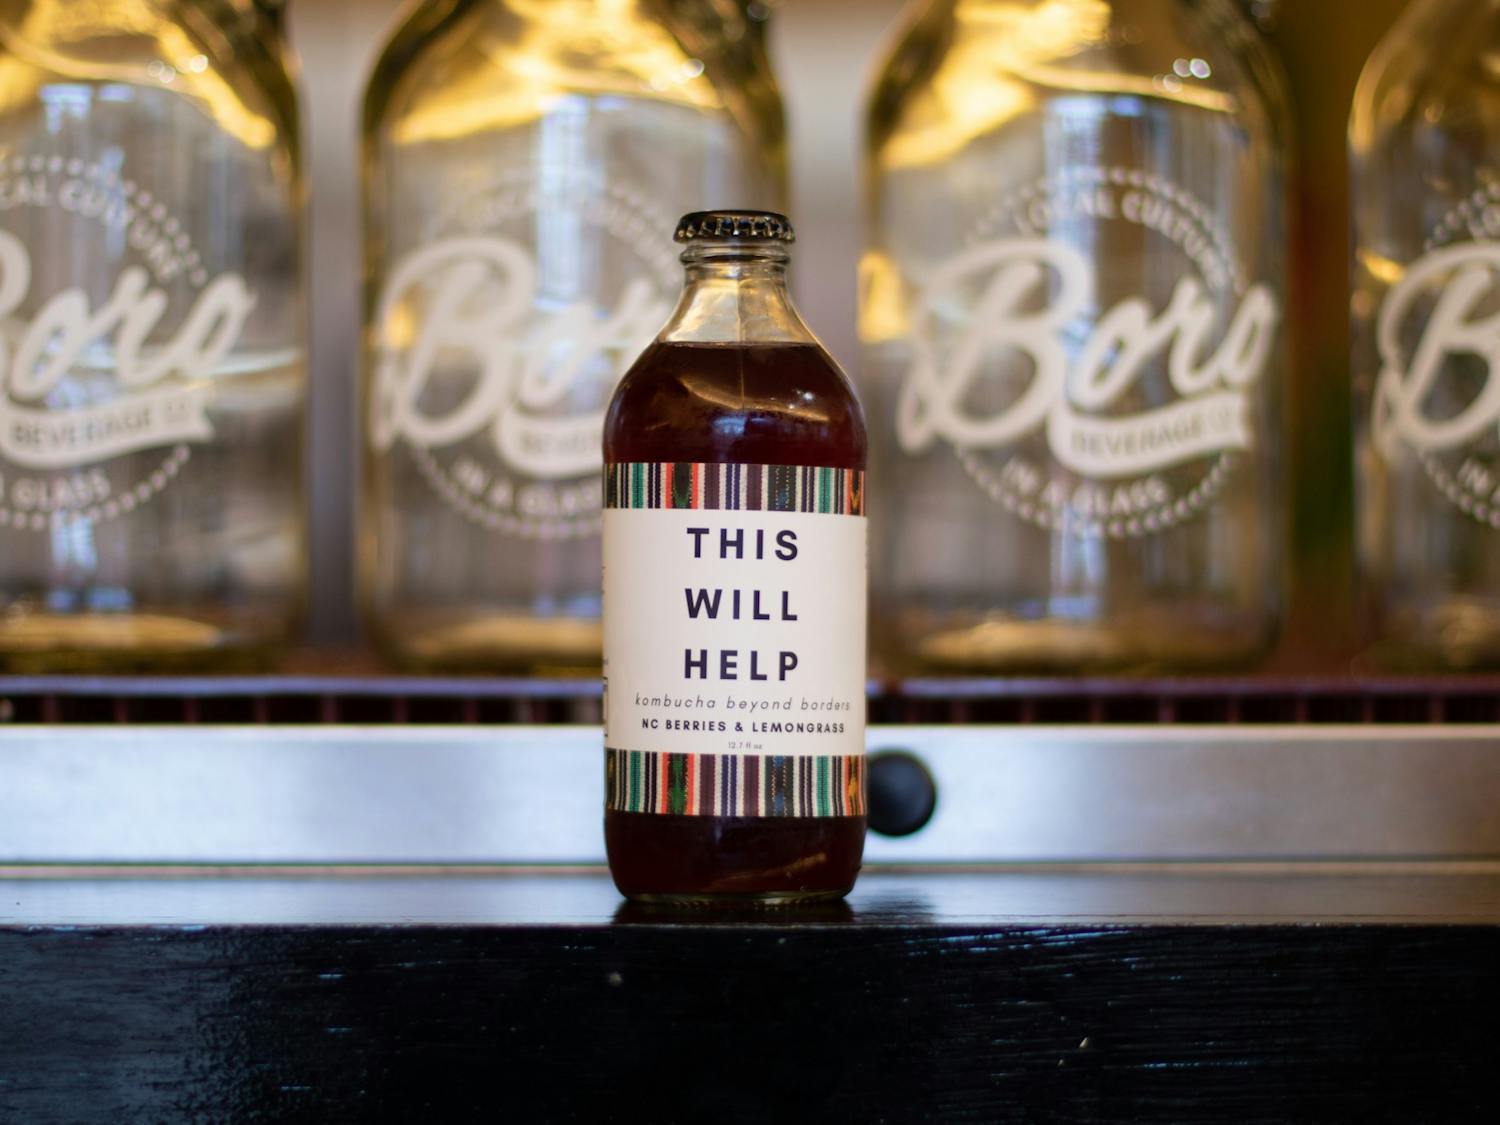 All profits from This Will Help, a new kombucha from Chapel-Hill-based Boro Beverage Company, will be donated to help immigrants in the Chapel Hill-Carrboro area.